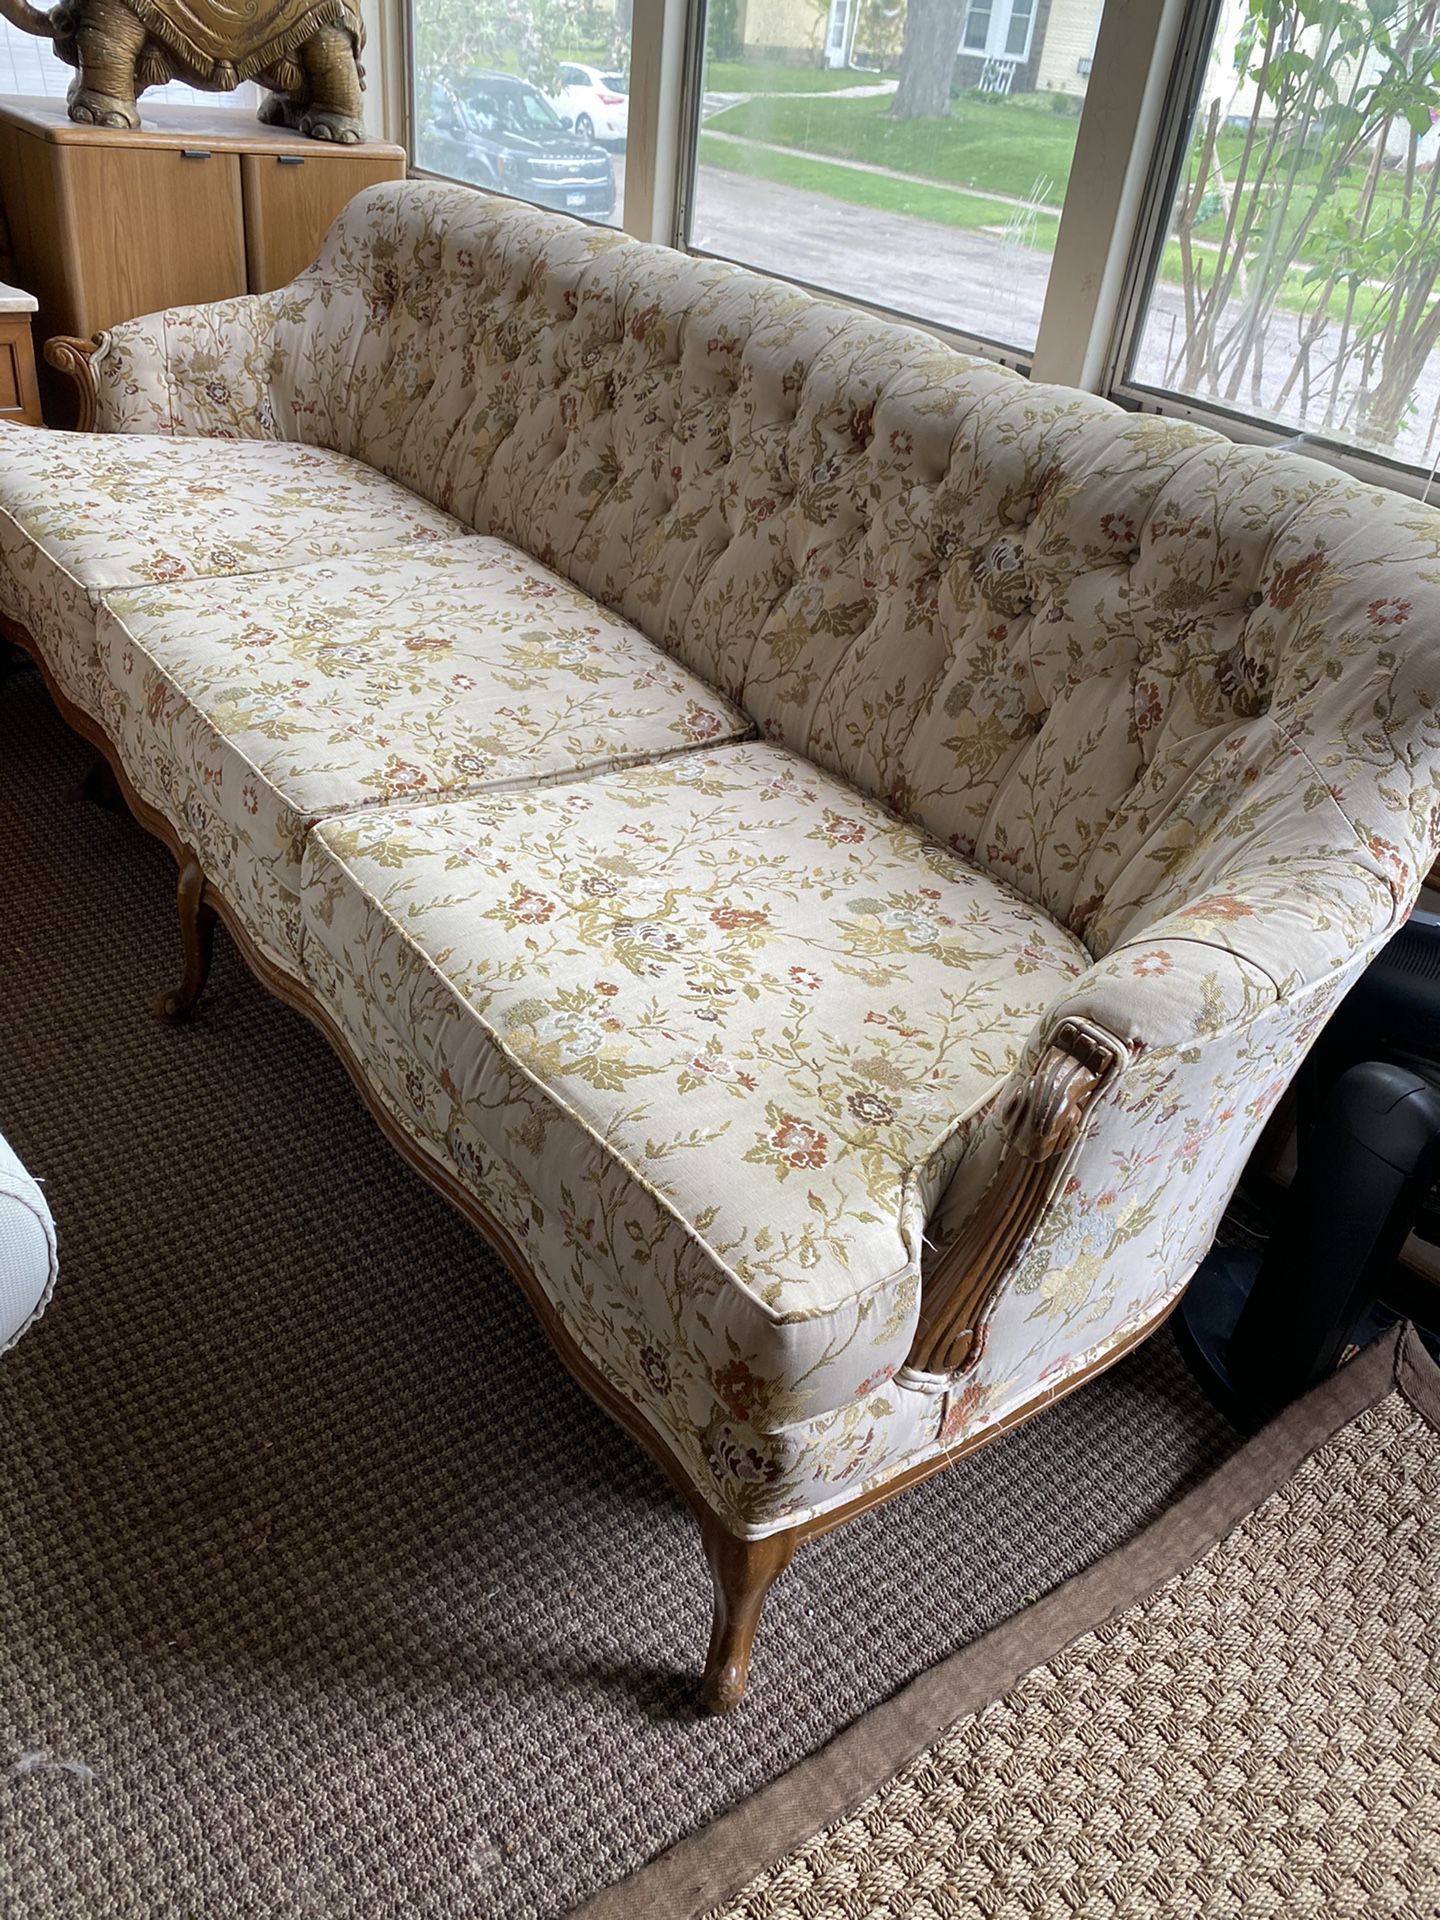 Victorian Sofa Couch For In Maplewood Mn Offerup